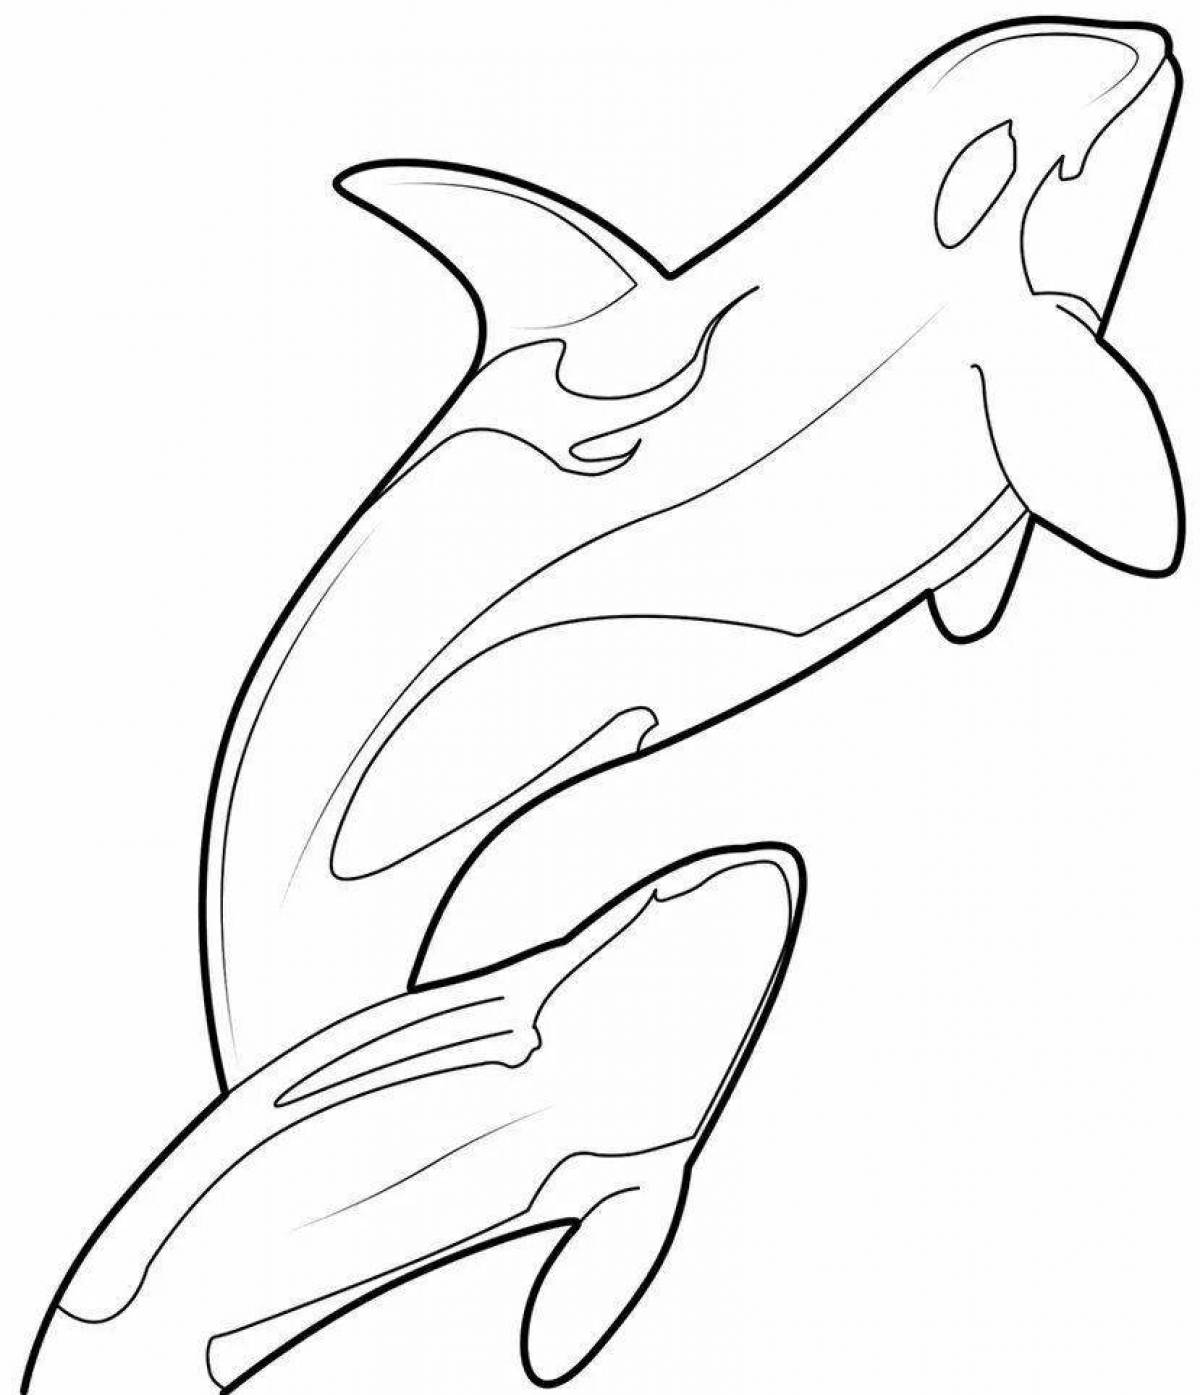 Silly killer whale coloring book for kids